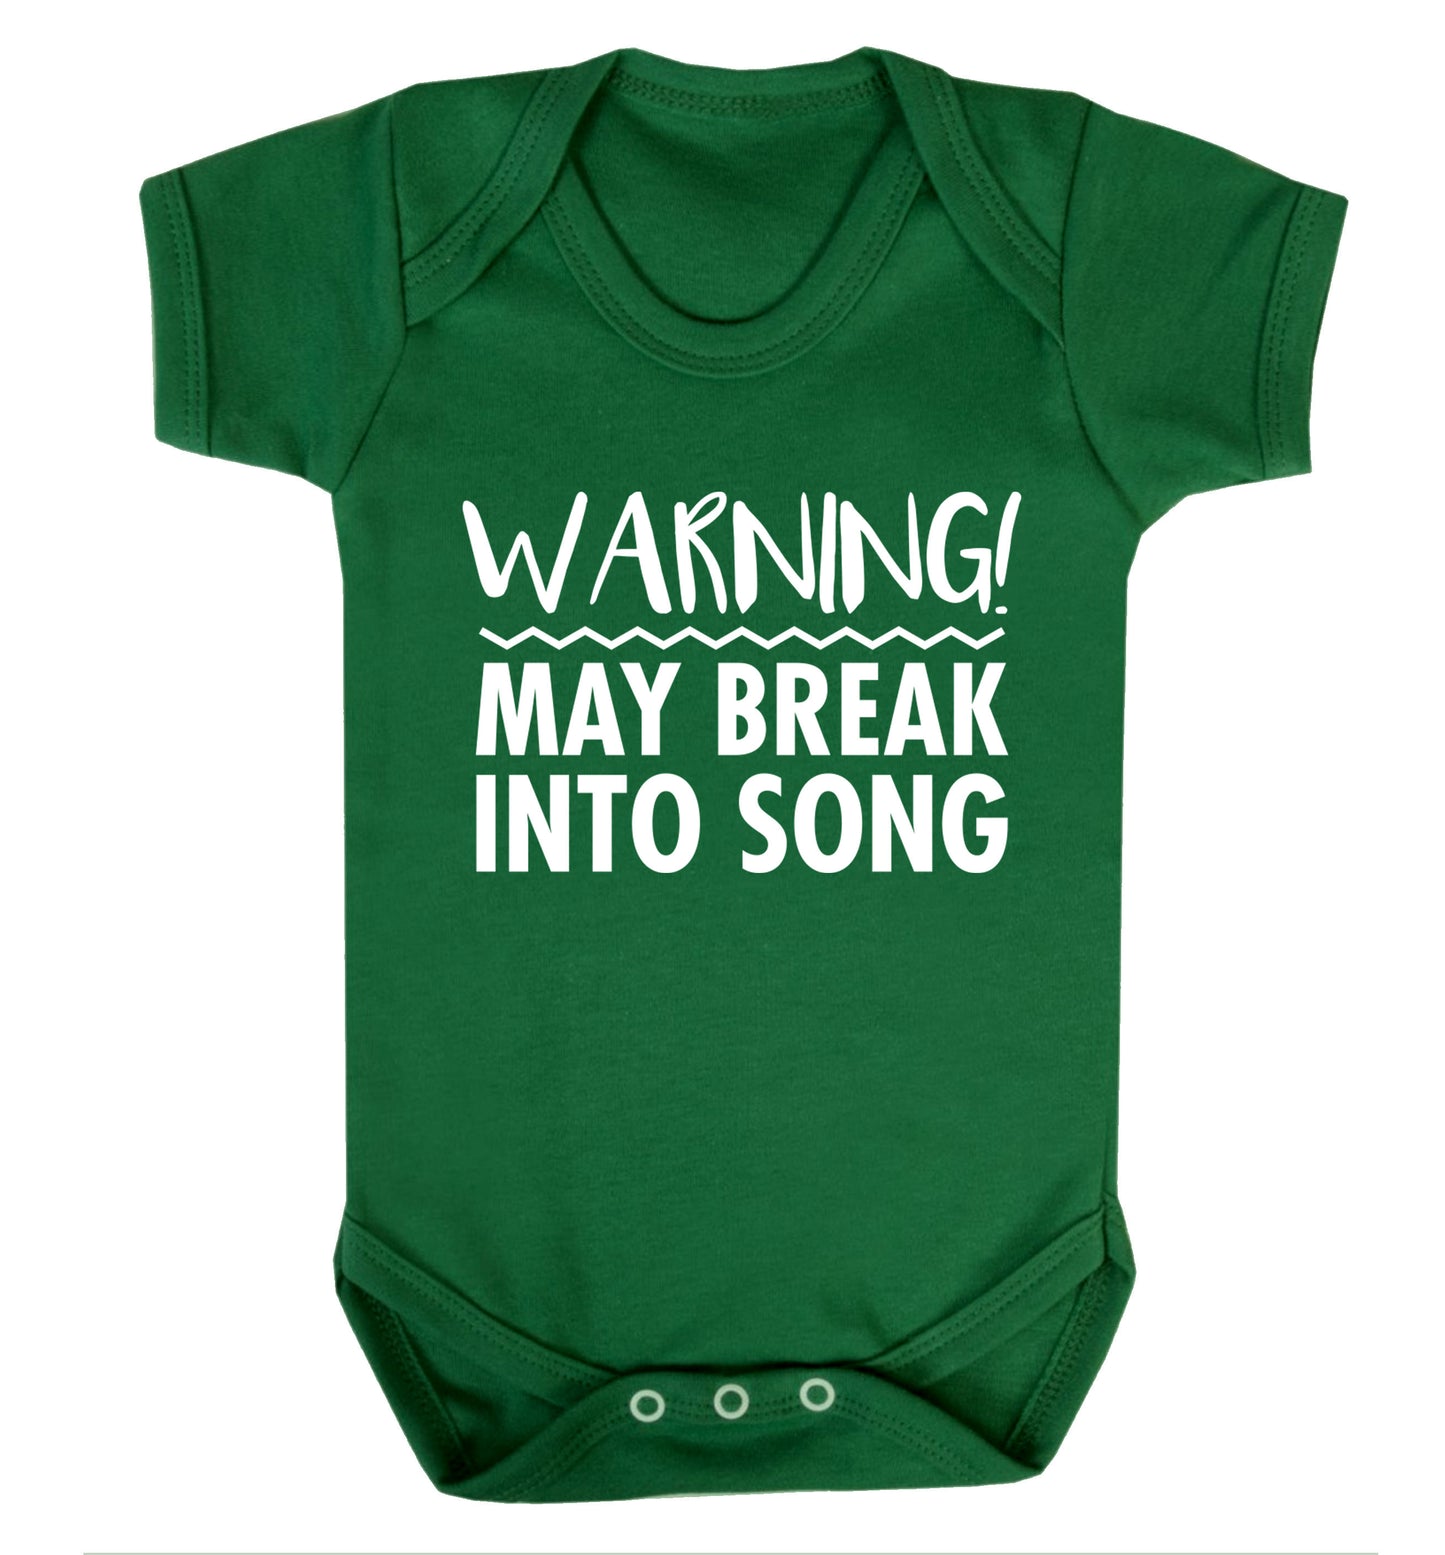 Warning may break into song Baby Vest green 18-24 months